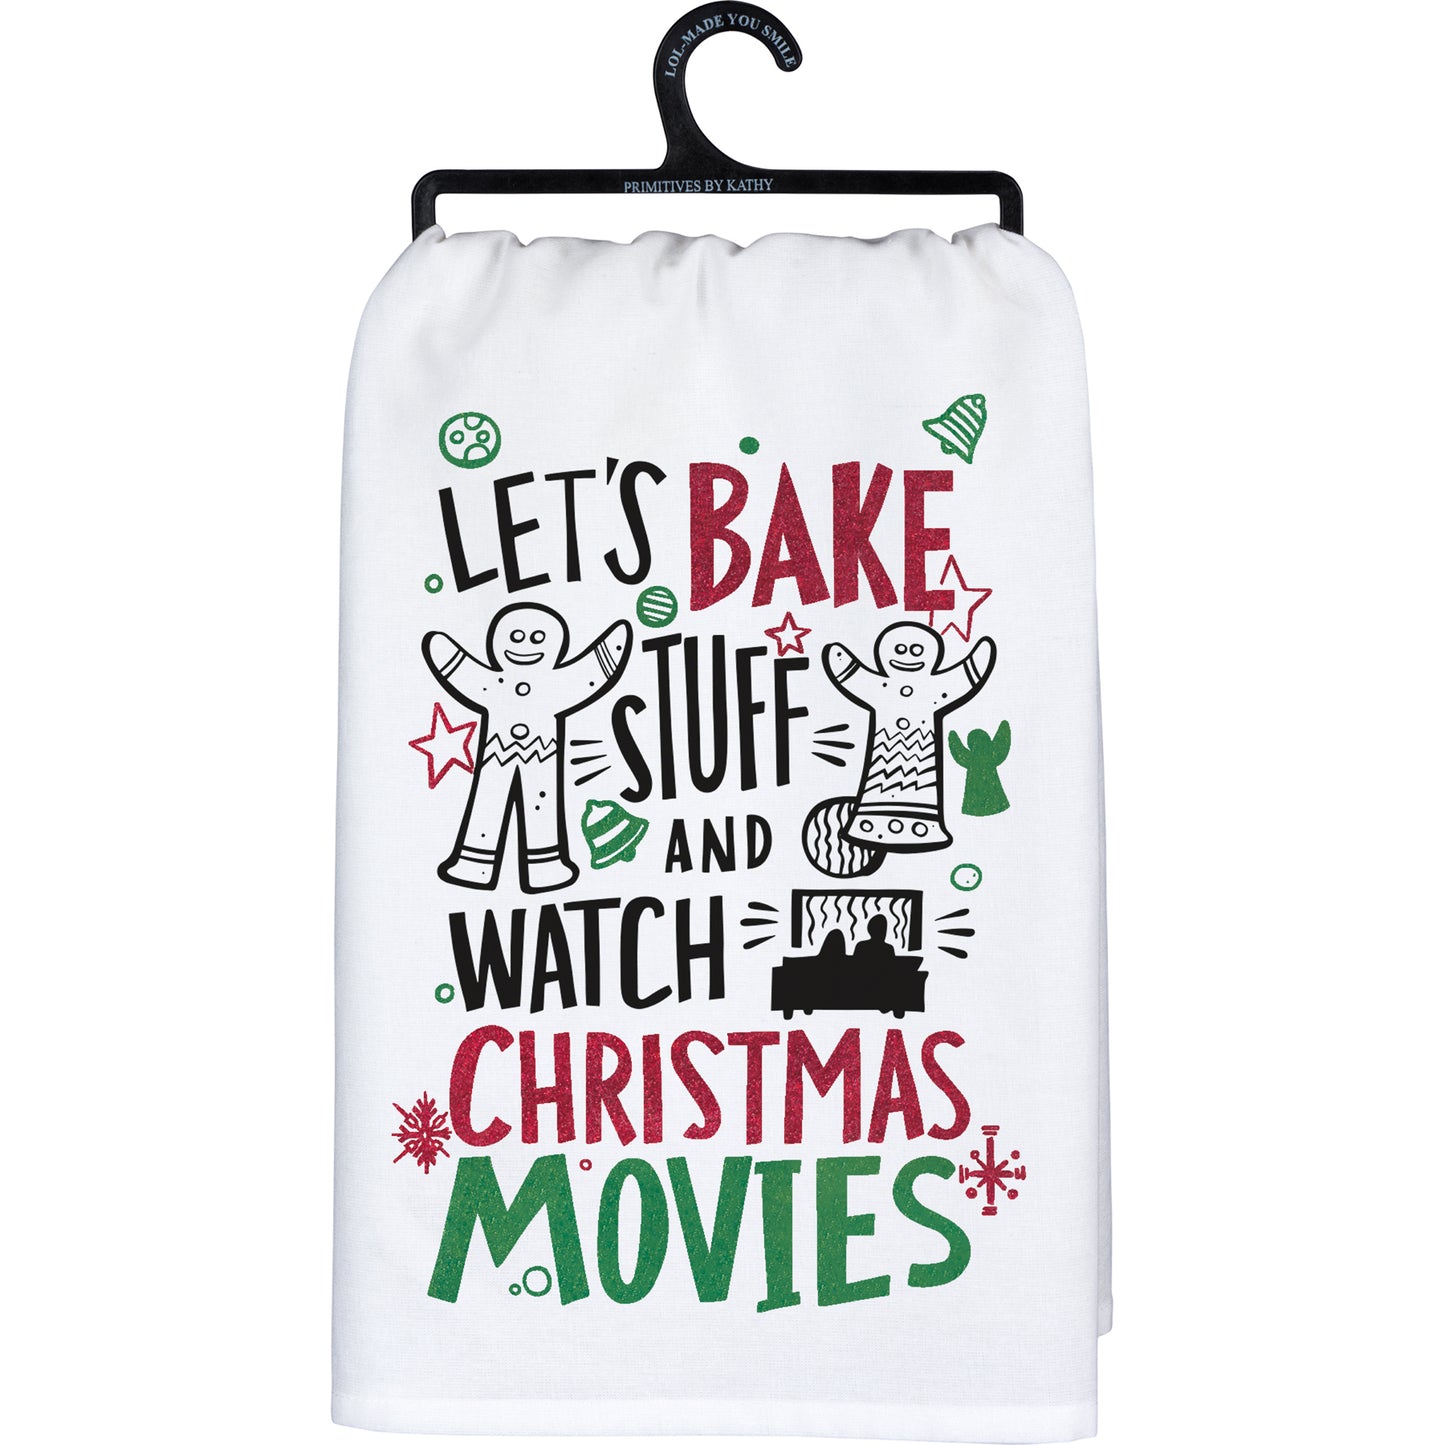 Let's Bake And Christmas Movies Kitchen Towel